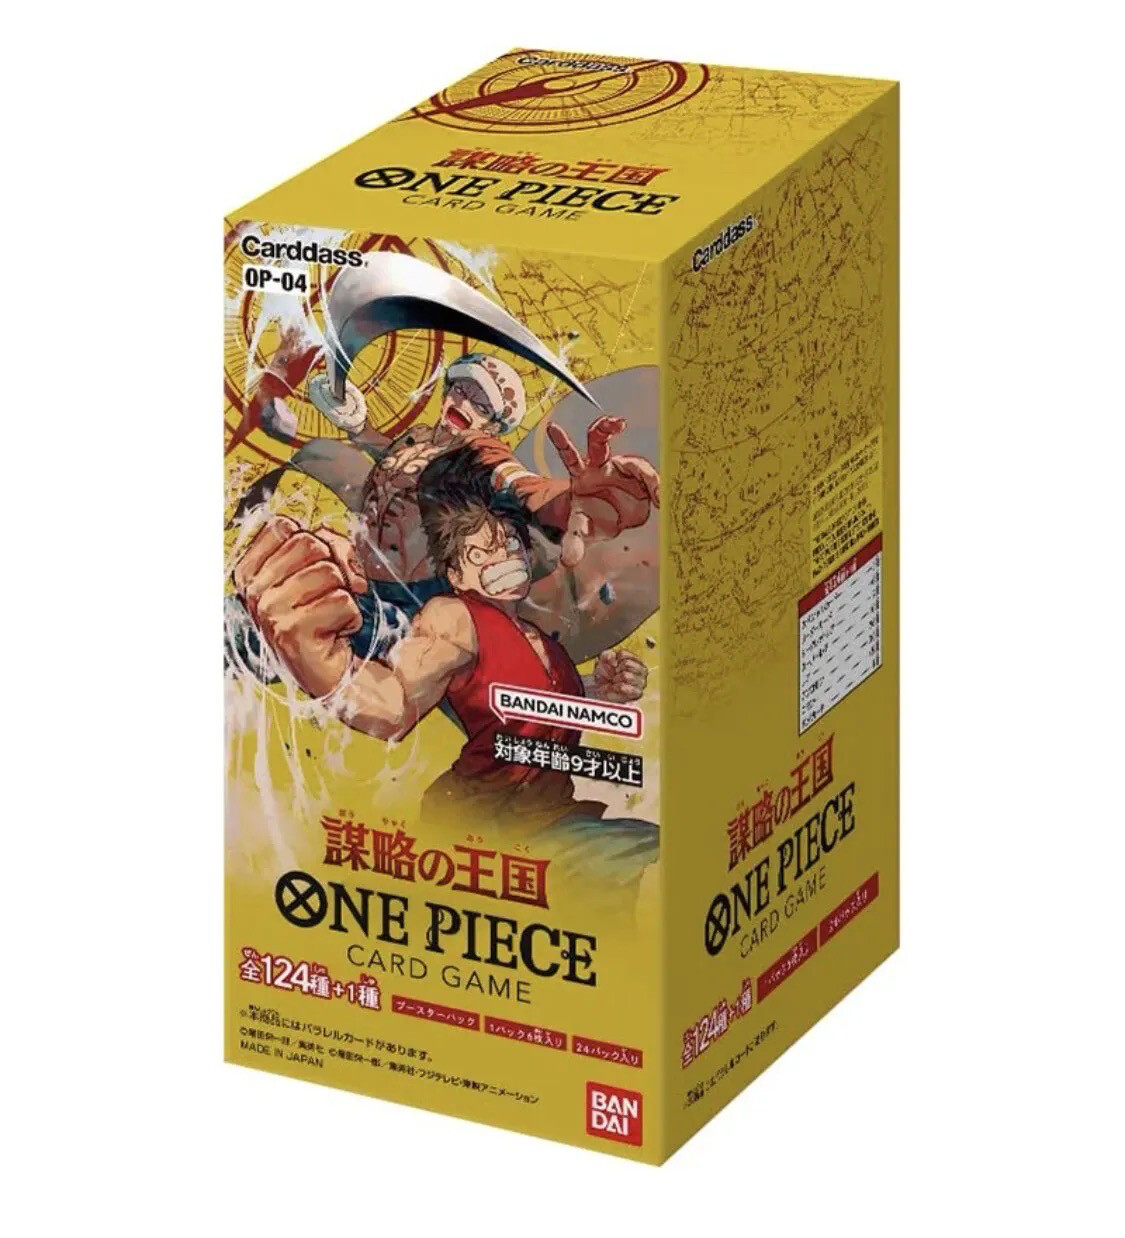 One Piece Card Game -Kingdom of Intrigue- Booster [OP-04] (Japanese)